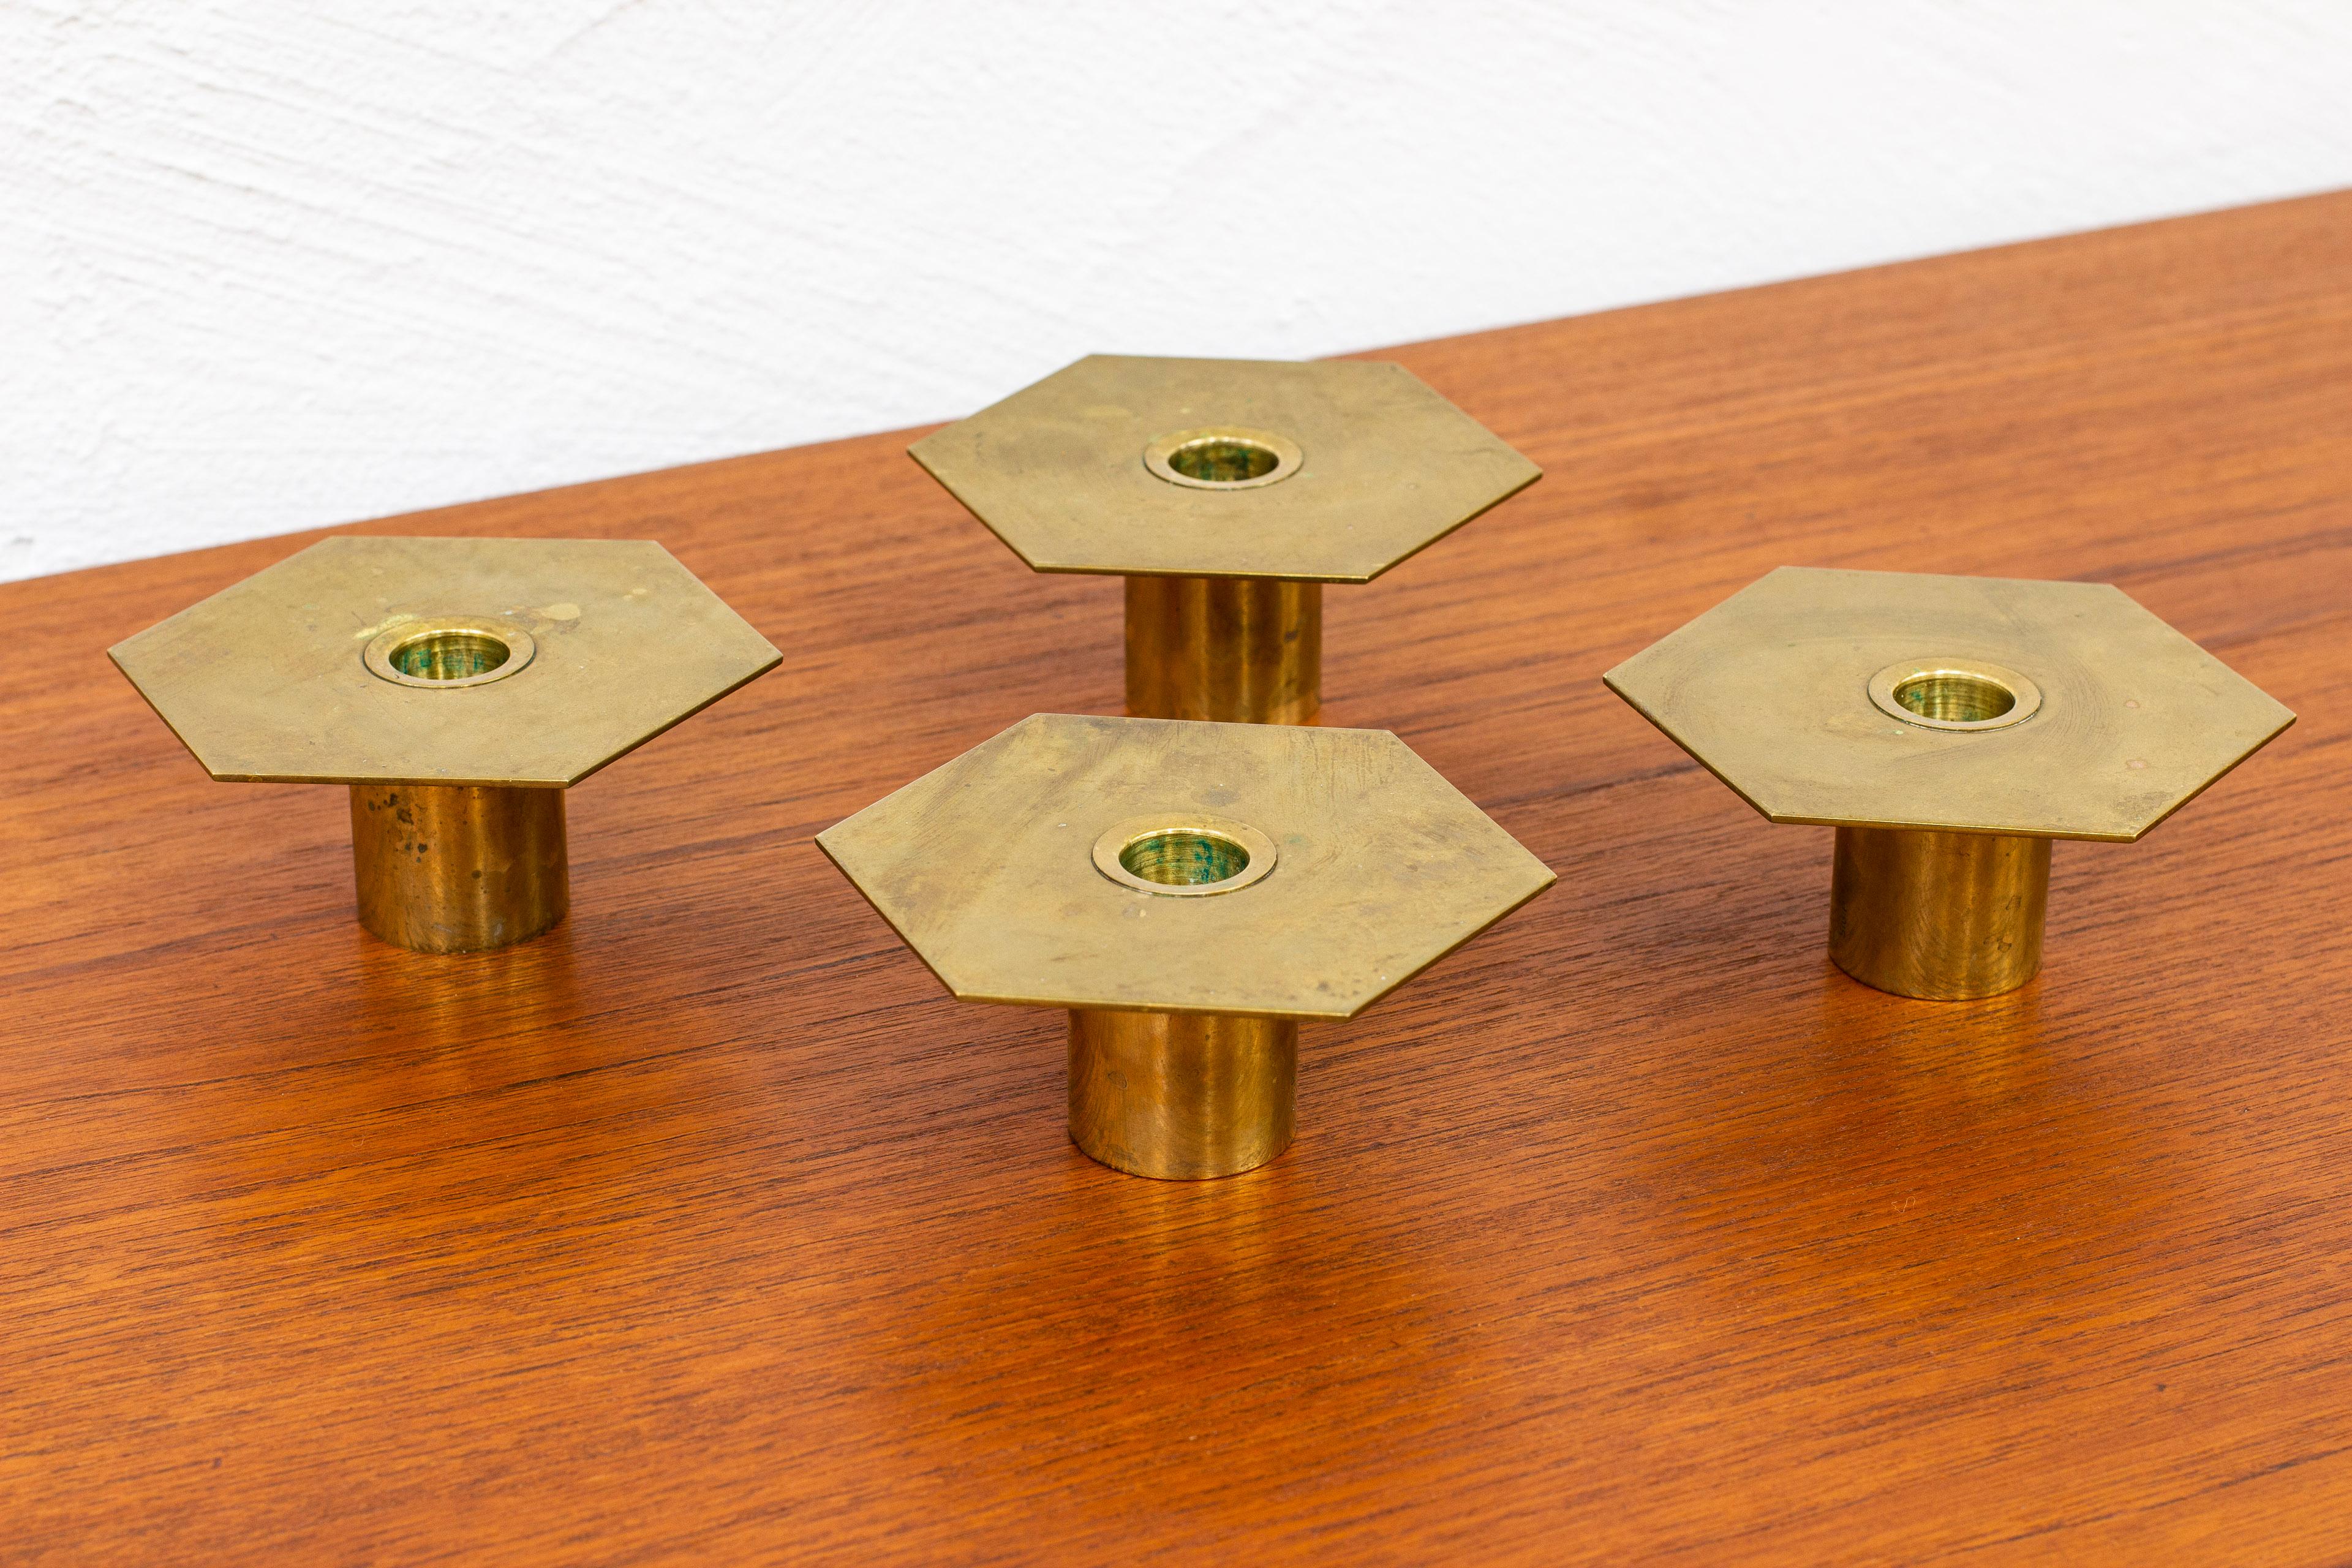 Set of four candlesticks designed and made by Sigurd Persson. Made from solid brass. Produced during the 1980s. Very good vintage condition with few signs of age related wear and patina.
 
Price for the set of four.

Dimensions: W. 11 D. 11 H. 5